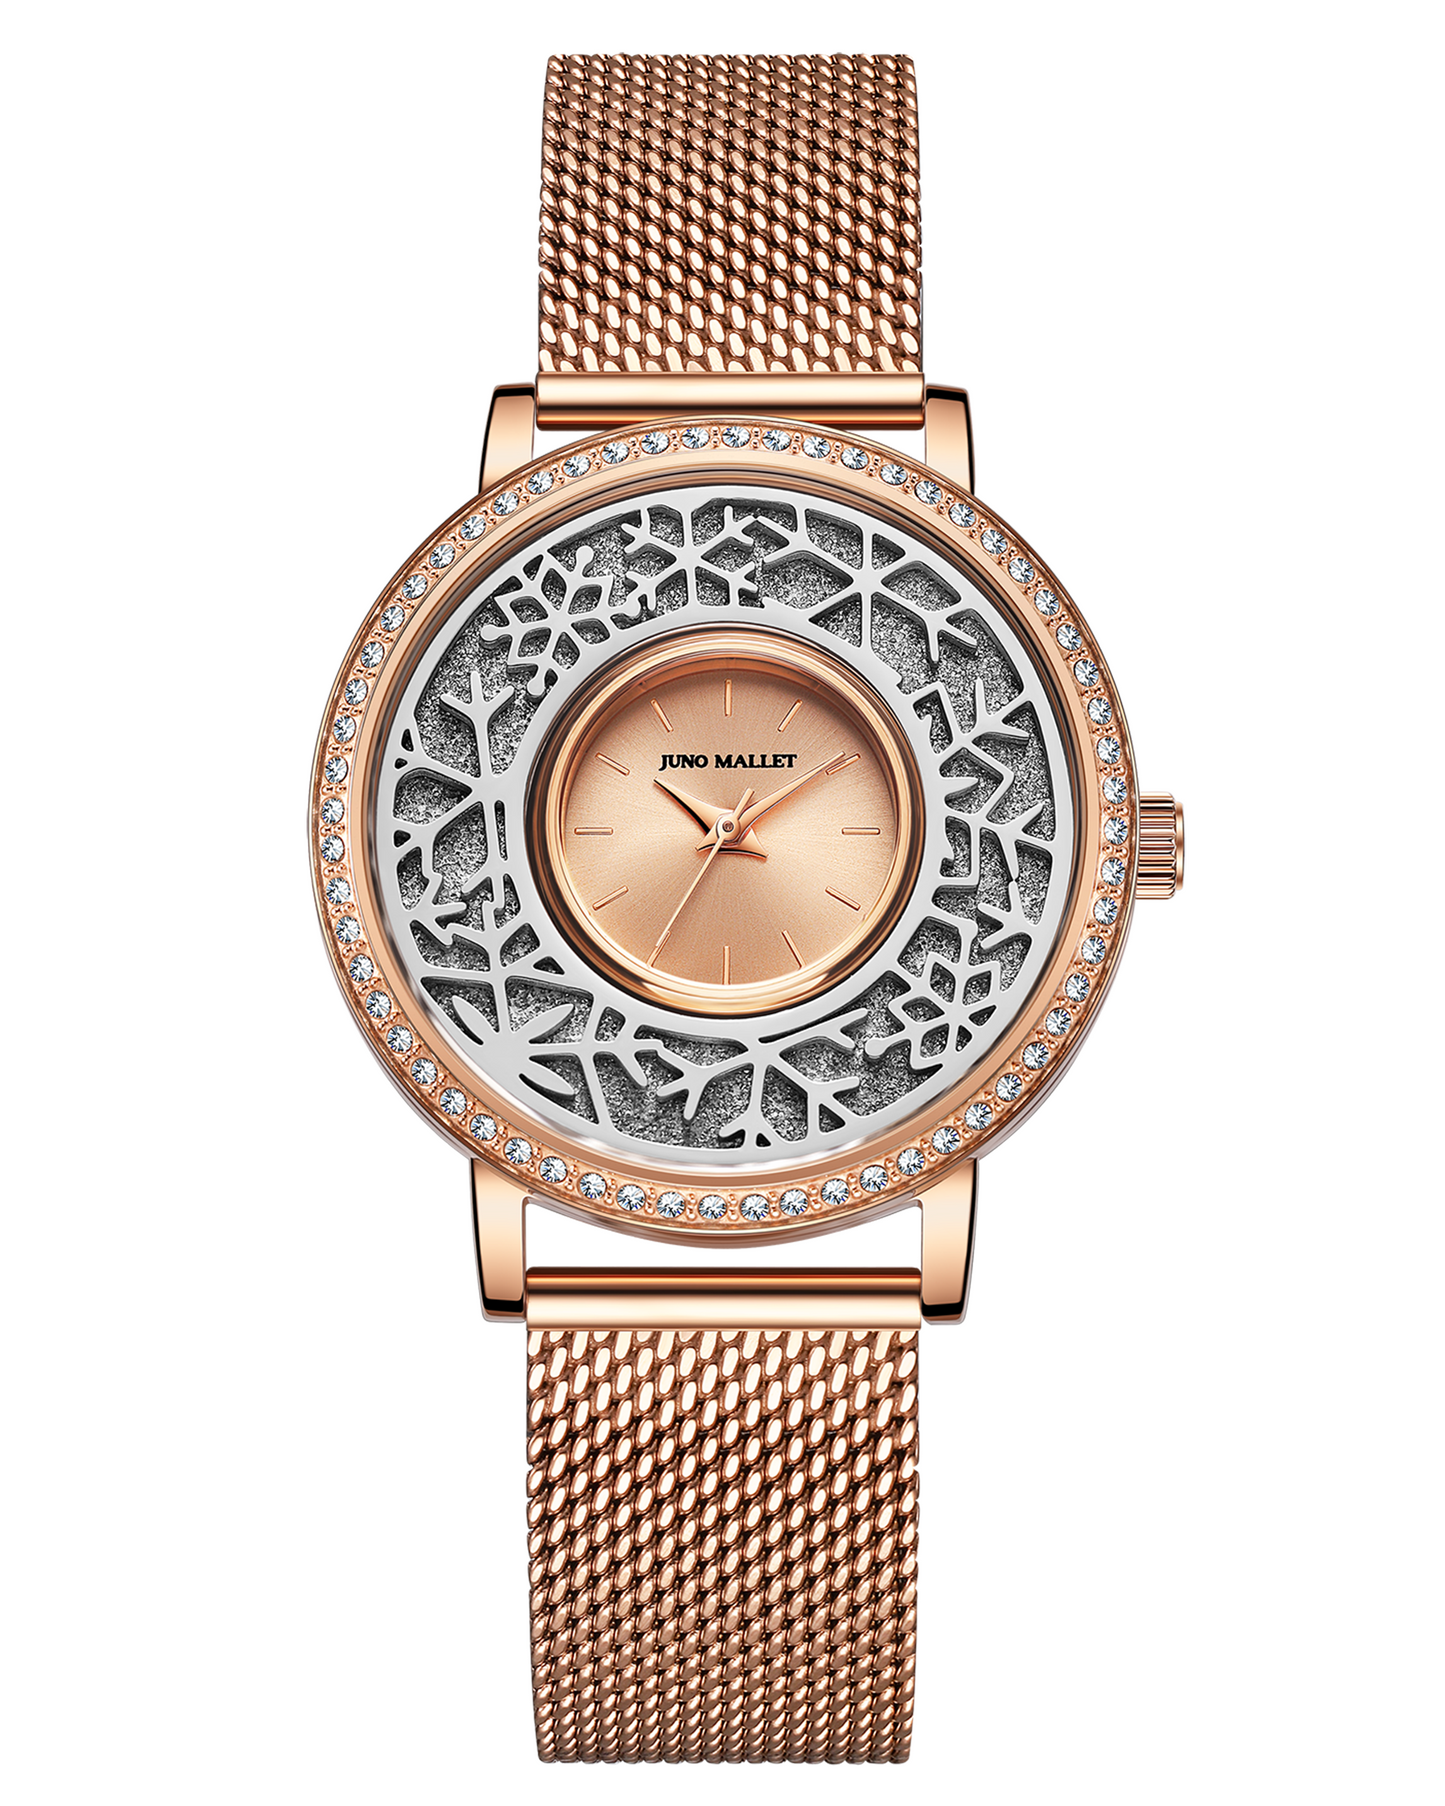 Crystal Lively Locket Watch | Rose Gold Minimalist Watch with Artistical Charm | Silver Ring of Snow